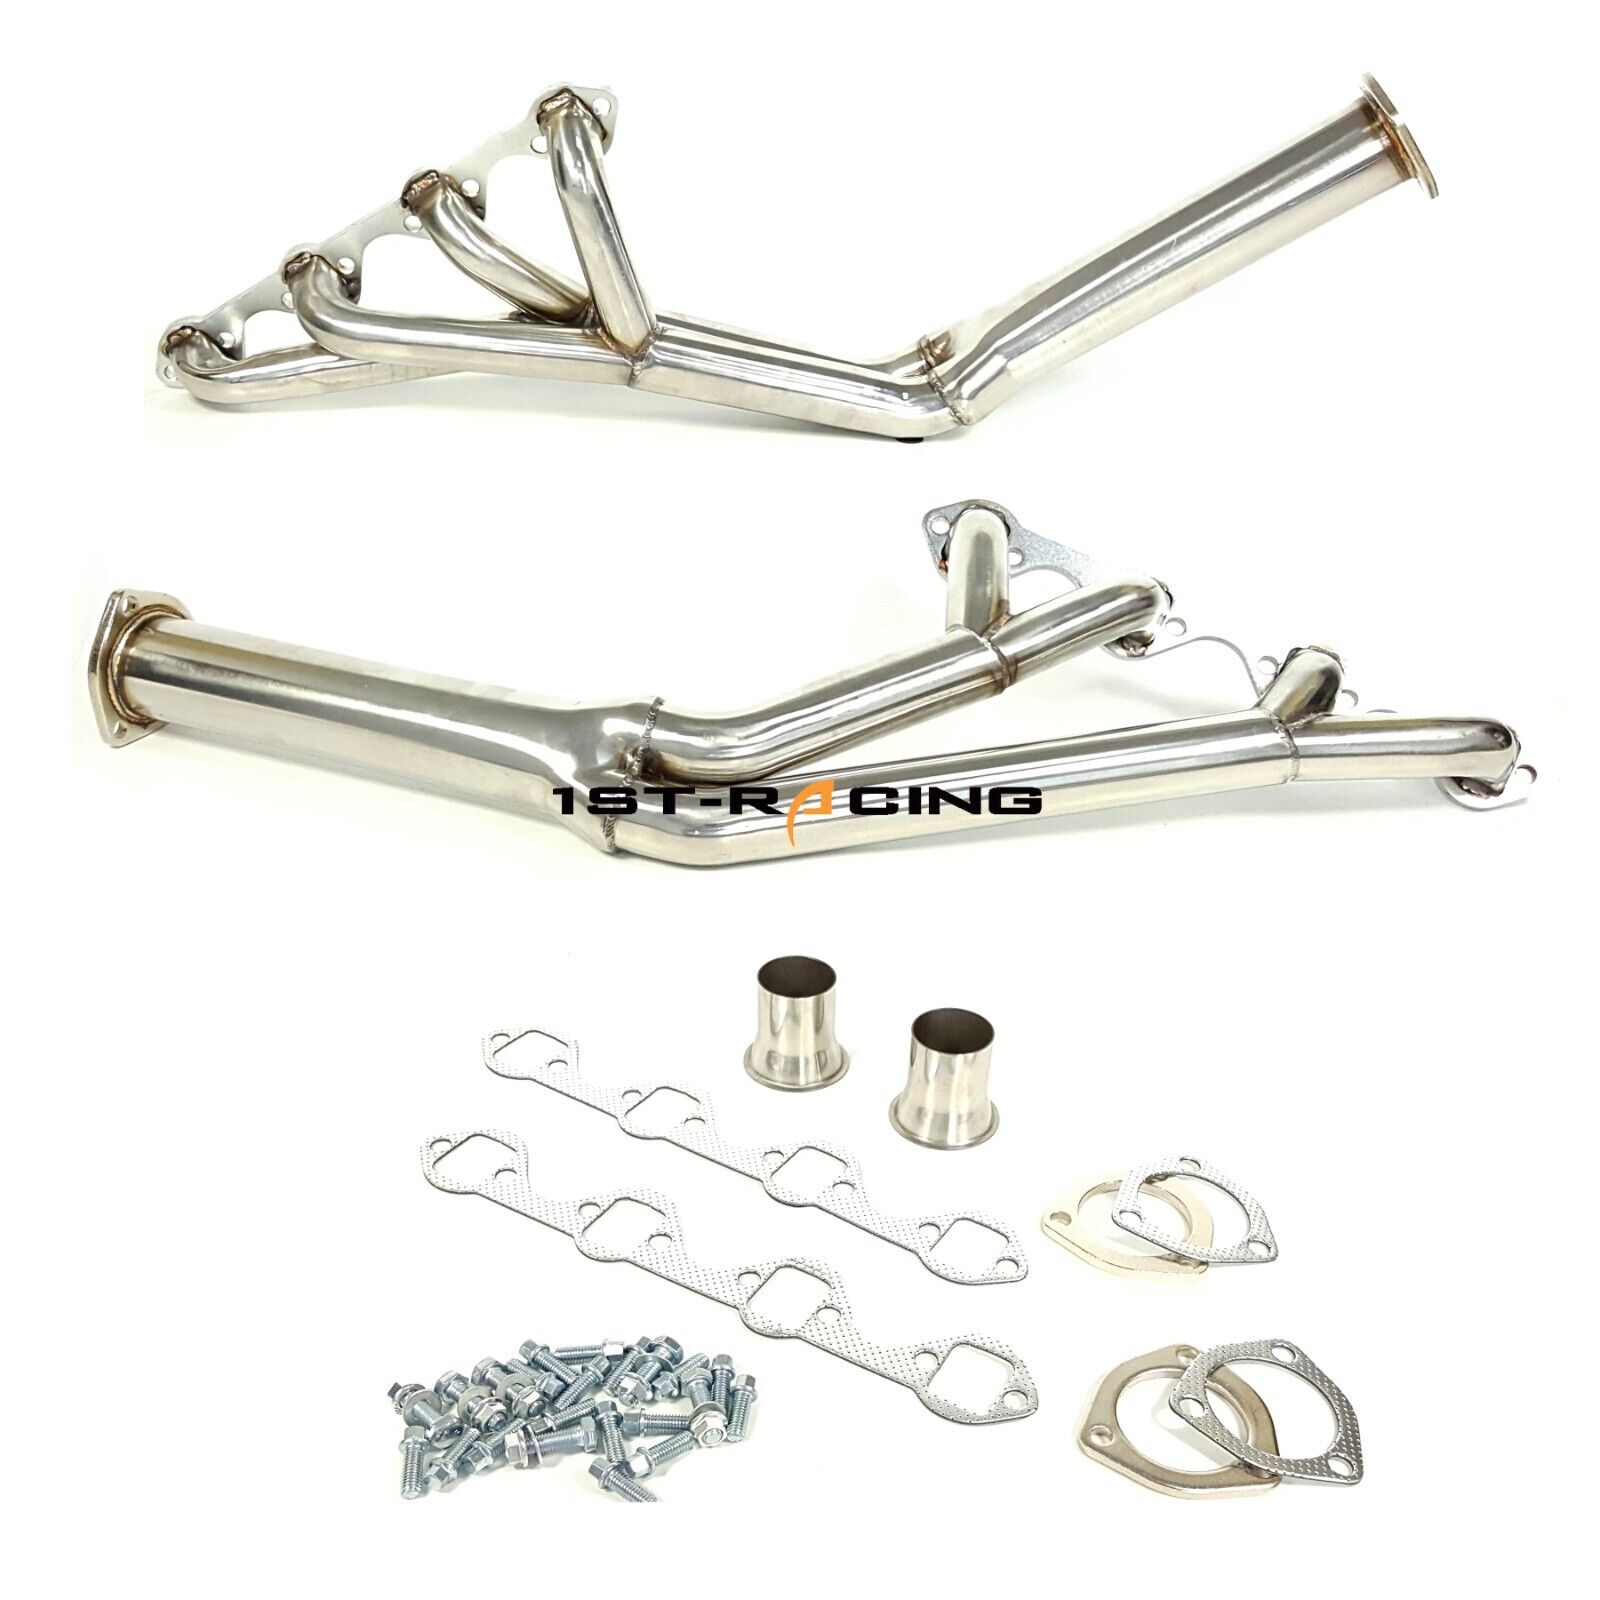 Tri-Y Exhaust Headers For 64-70 Ford Fairlane Falcon Mustang 260 289 302 US SHIP